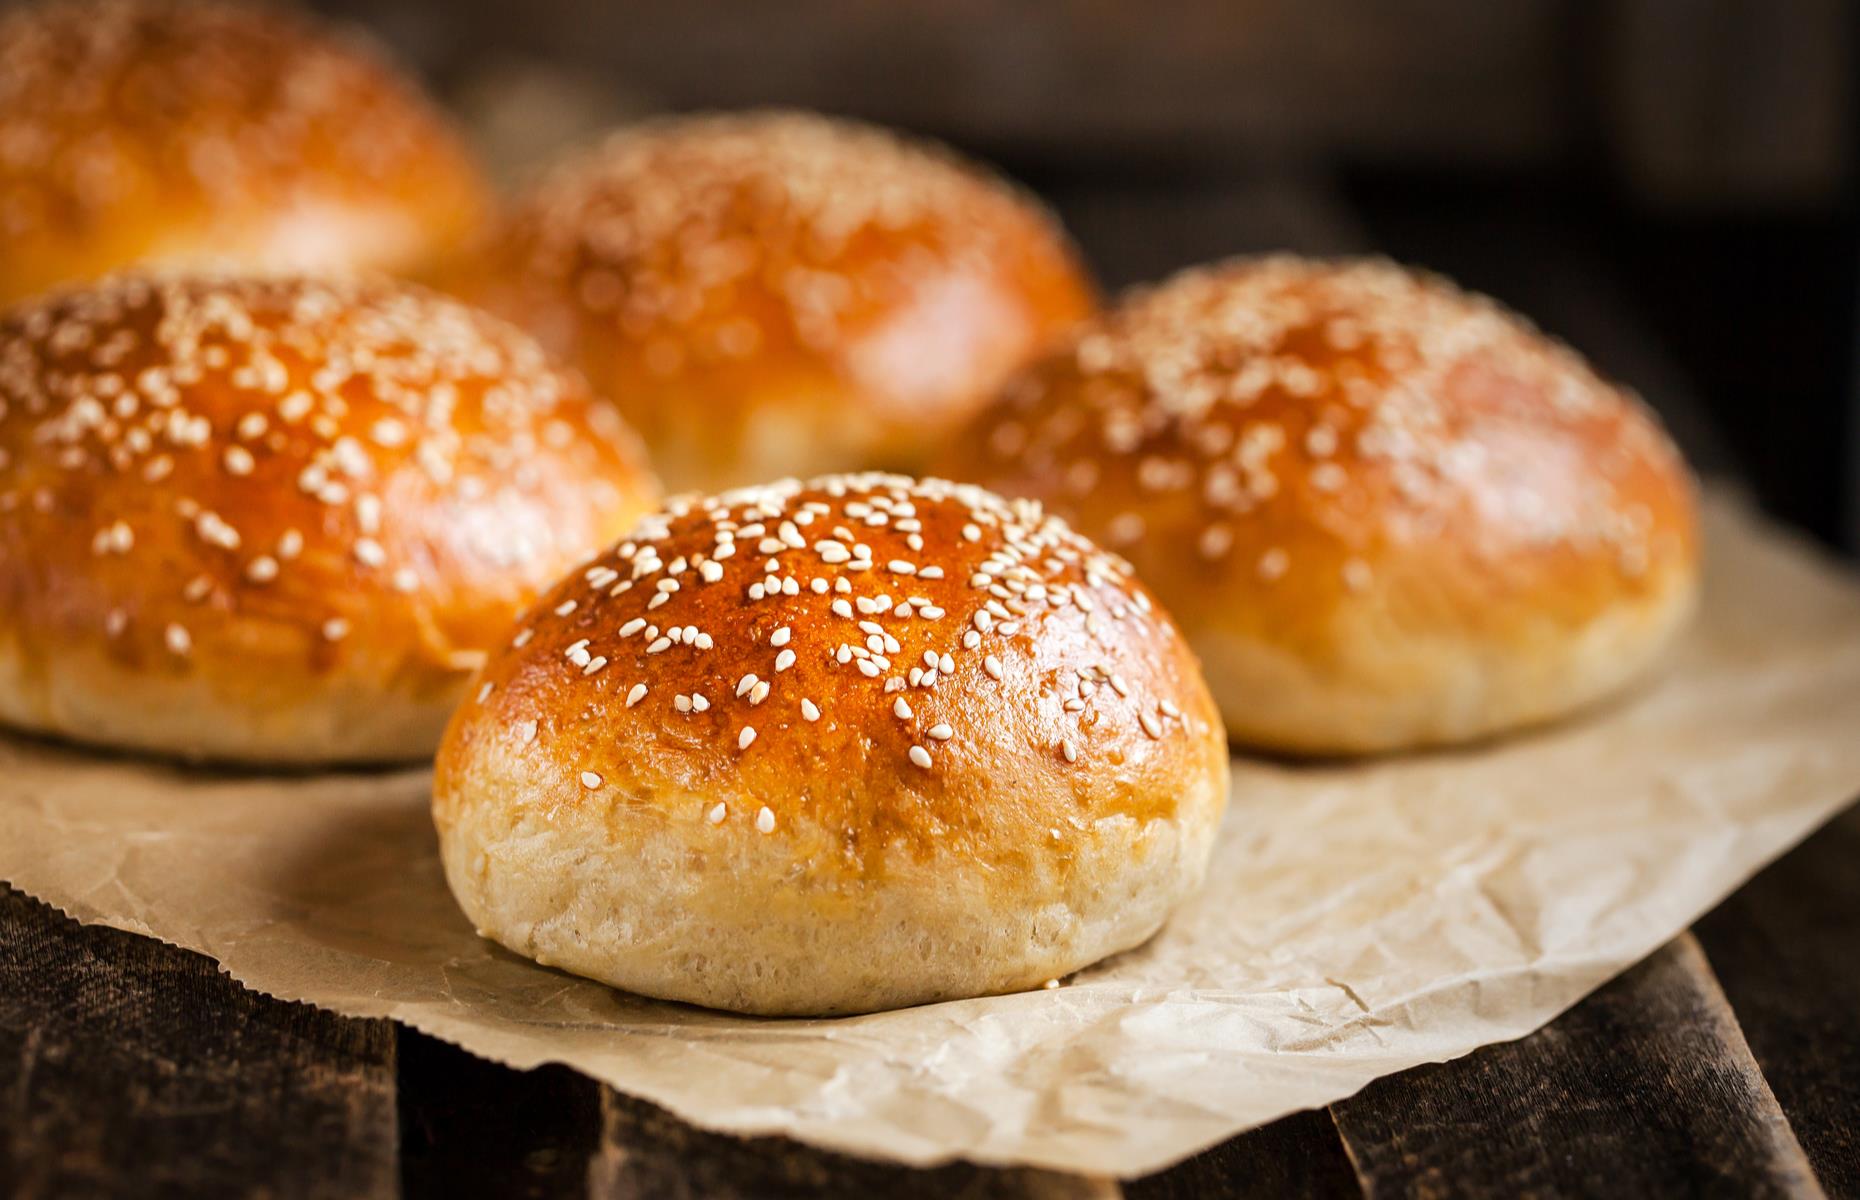 <p>Take your next barbecue or burger night to new heights by making your own buns. For something extra special – and just a little bit different – these tasty soft rolls with a crisp, glossy crust contain grated cheese and are topped with sesame seeds.</p>  <p><a href="https://www.lovefood.com/recipes/58091/basic-burger-bun-recipe"><strong>Get the recipe for burger buns here</strong></a></p>